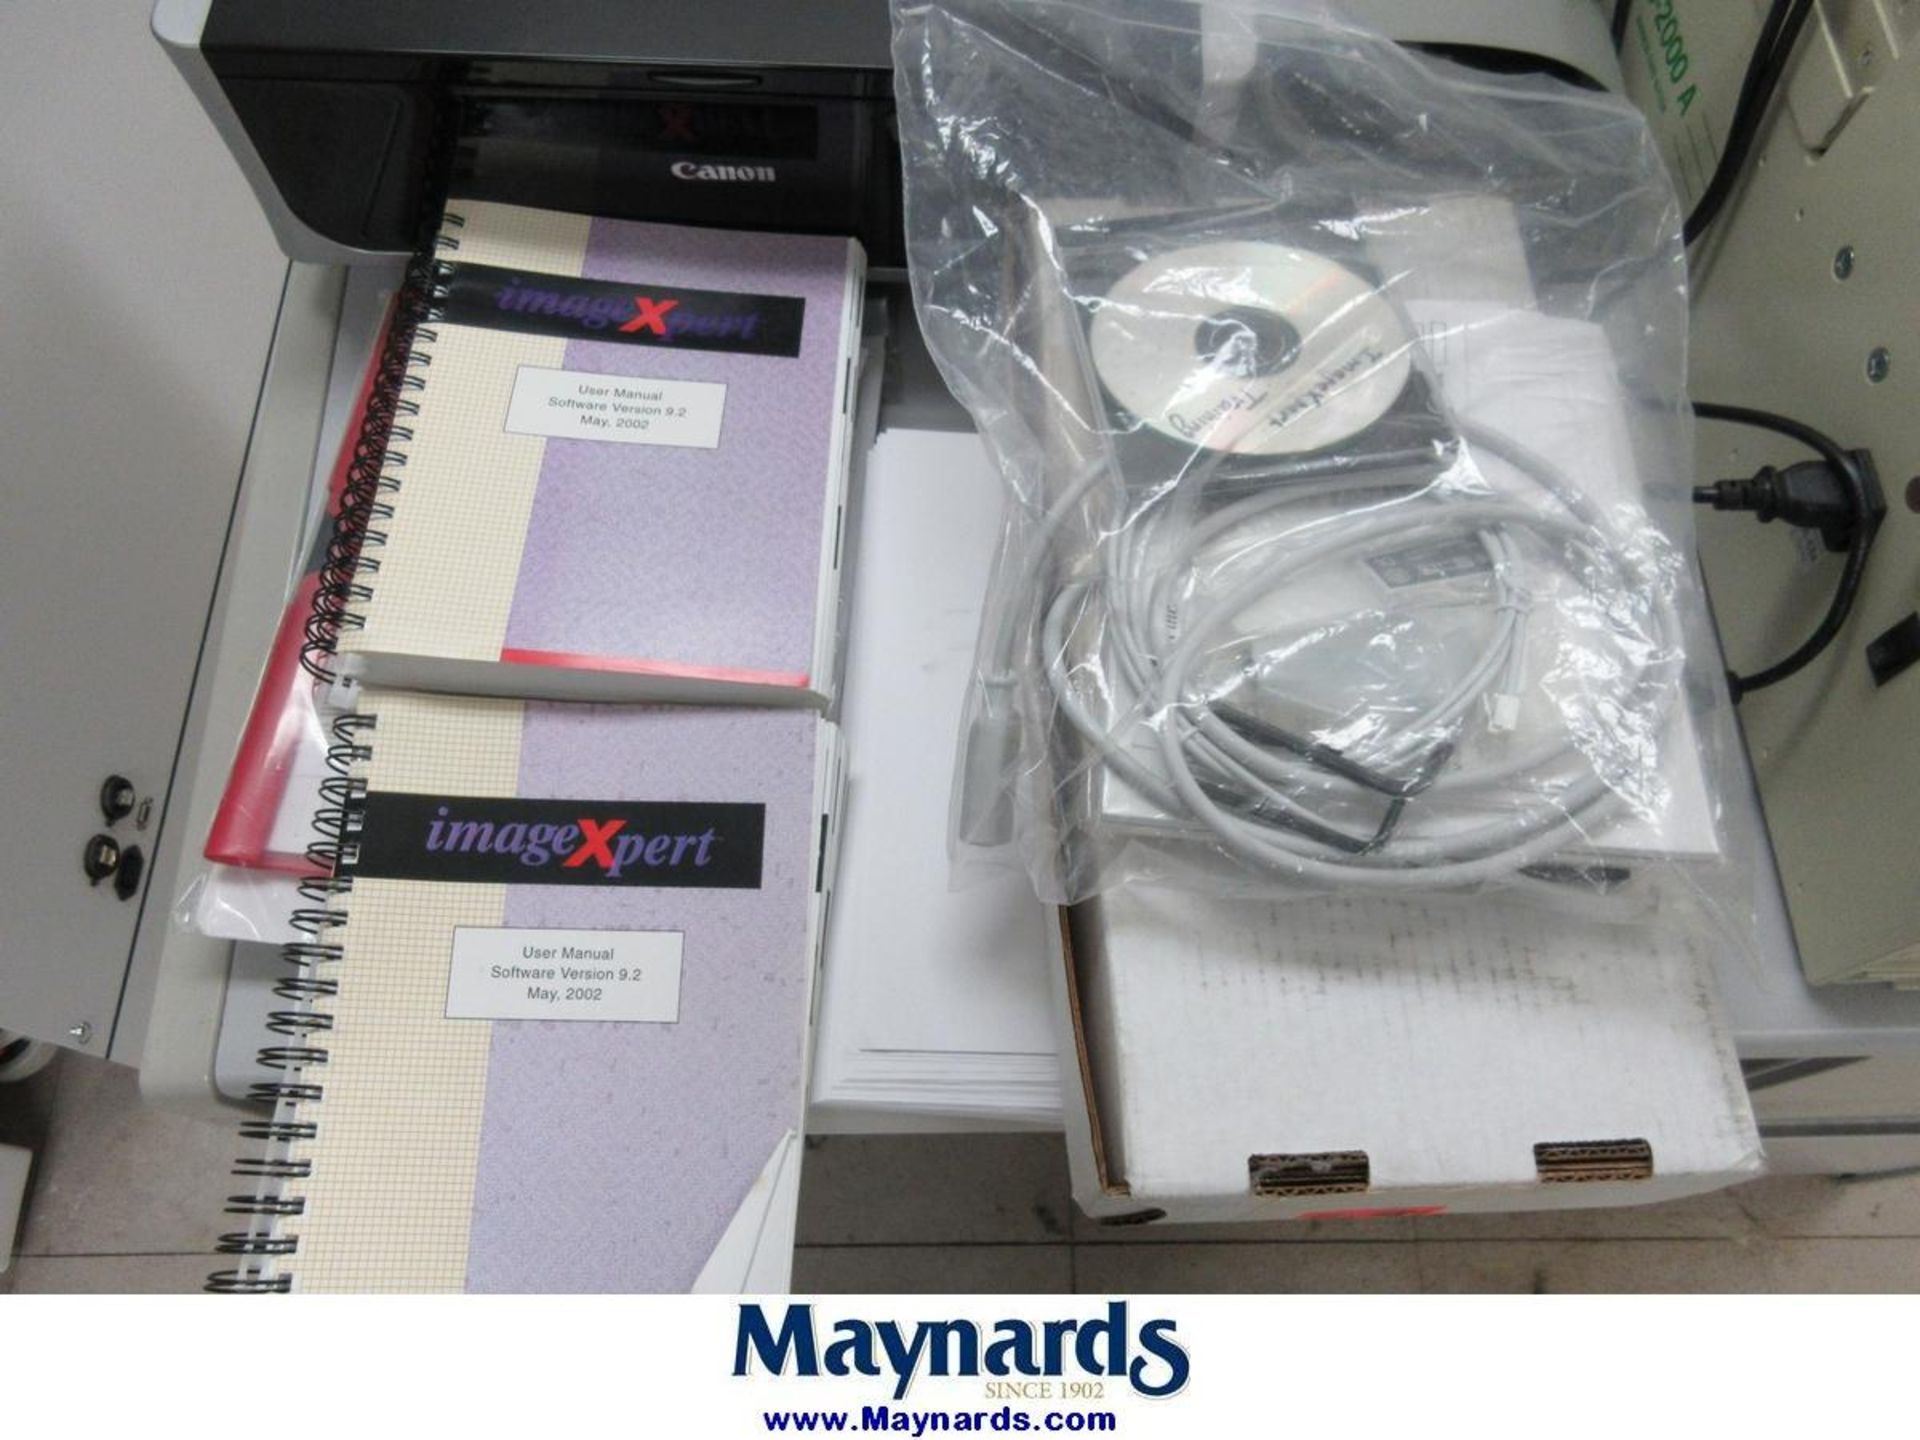 ImageXpert Inspection System - Image 10 of 10